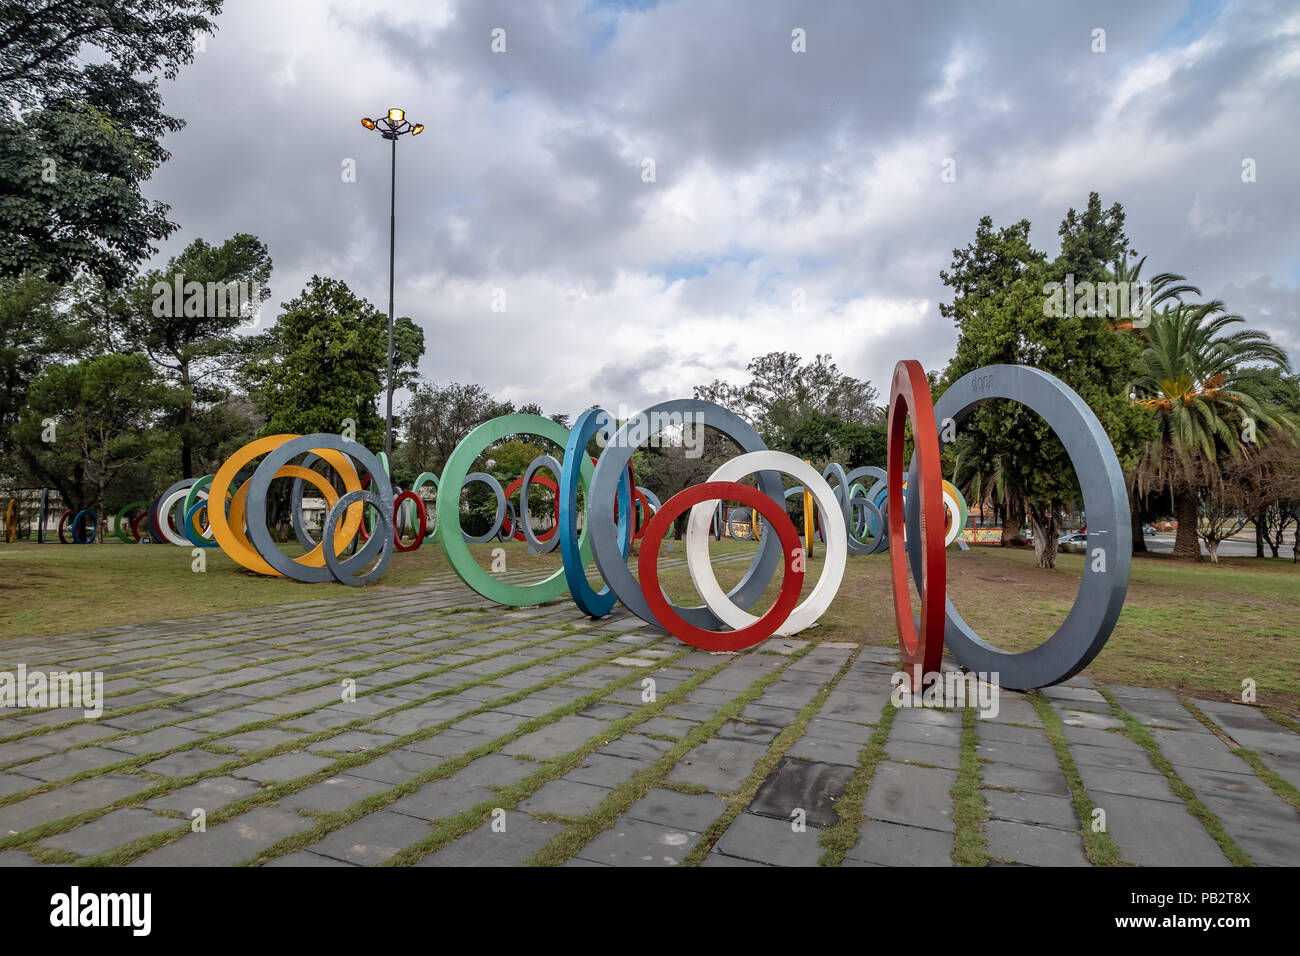 Bicentenary Square (Plaza del Bicententario) with rings telling the history of Argentina - Cordoba, Argentina Stock Photo